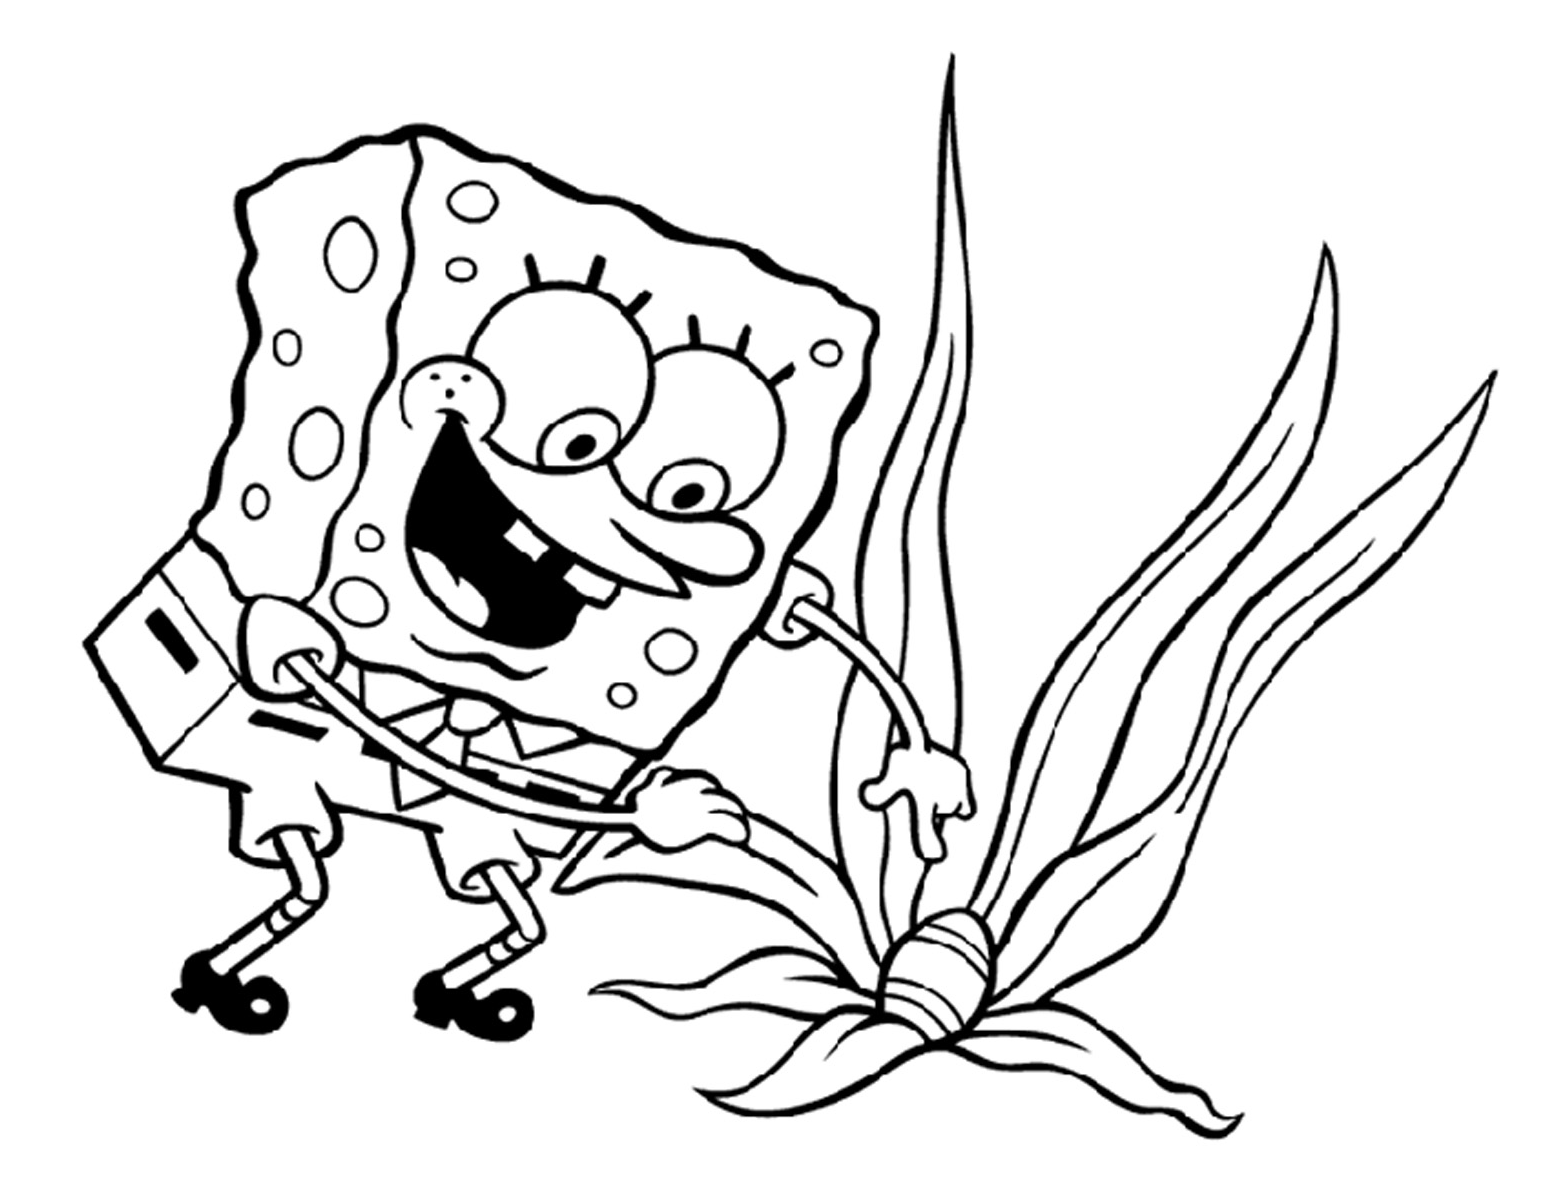 coloring pages of sopngebob - photo #15